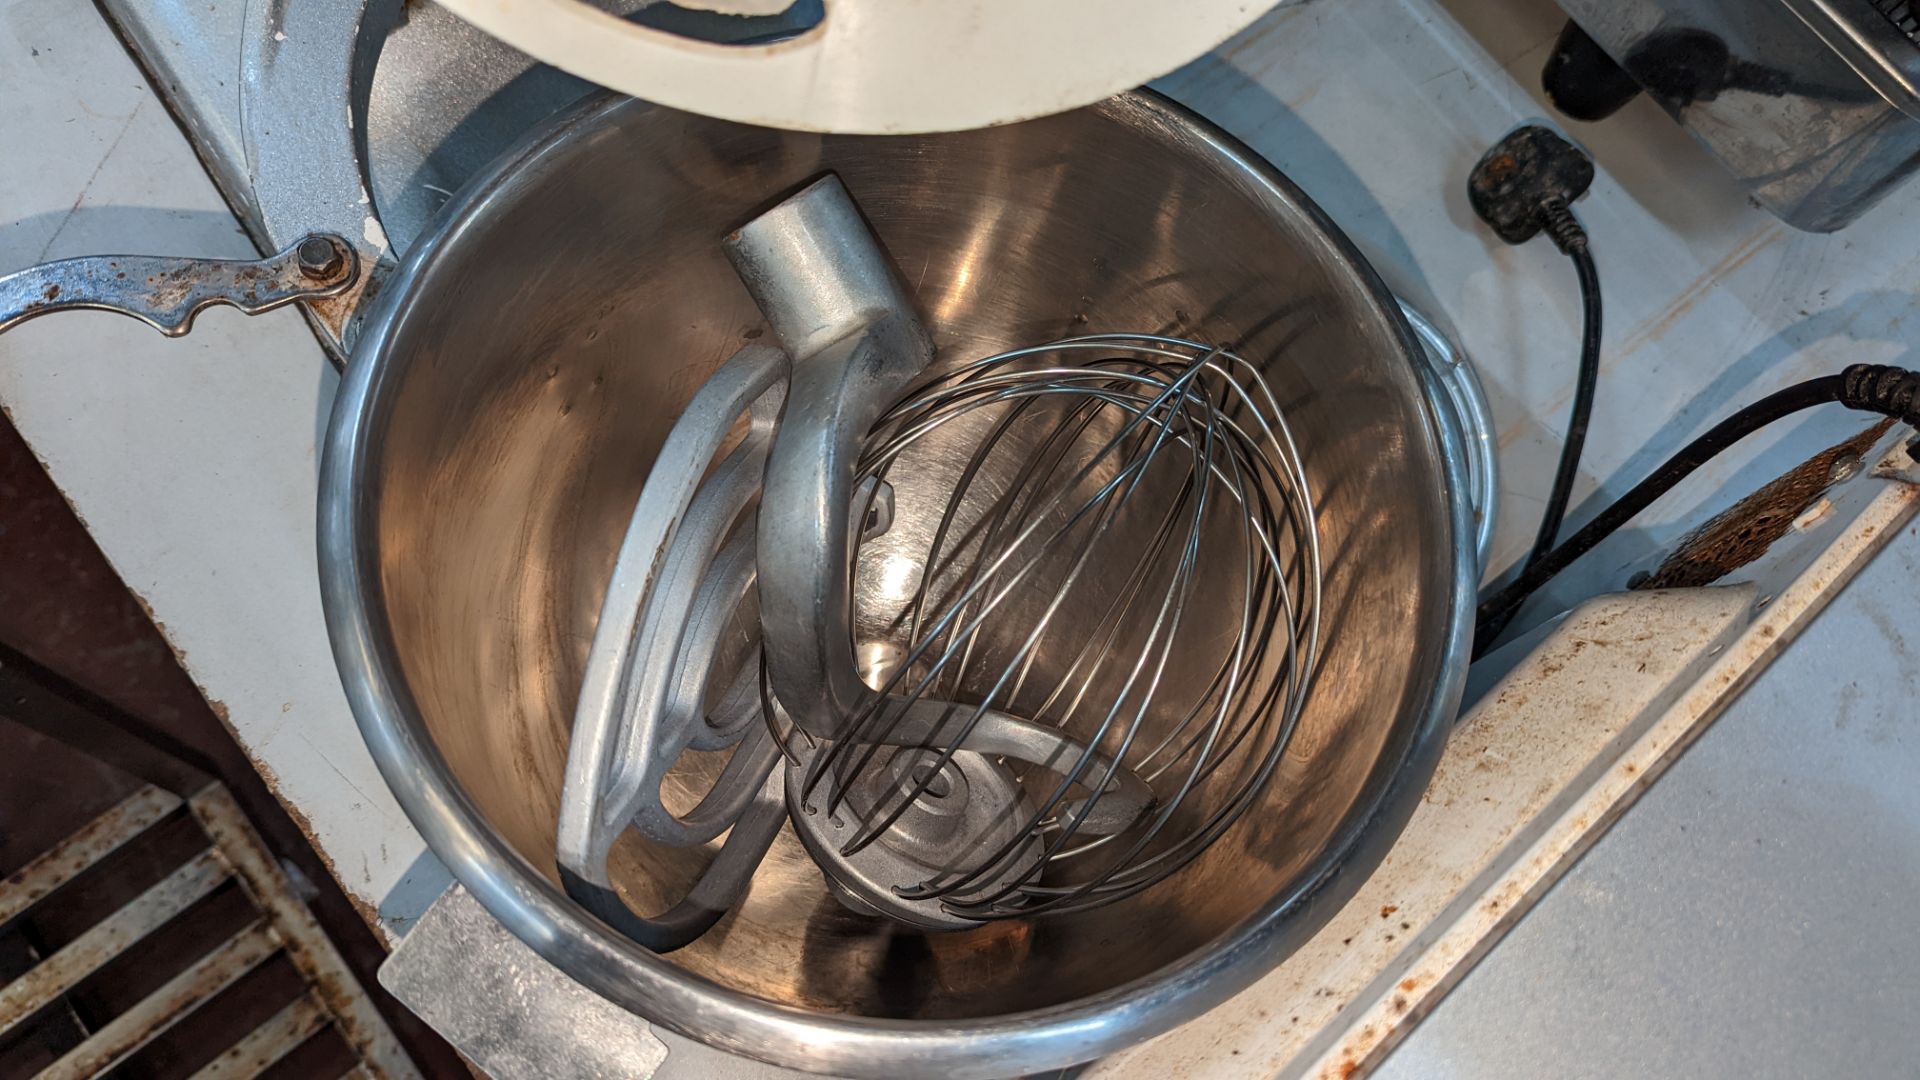 Vollrath heavy-duty mixer with removable bowl & 3 assorted attachments (whisk, paddle & hook) - Image 7 of 8